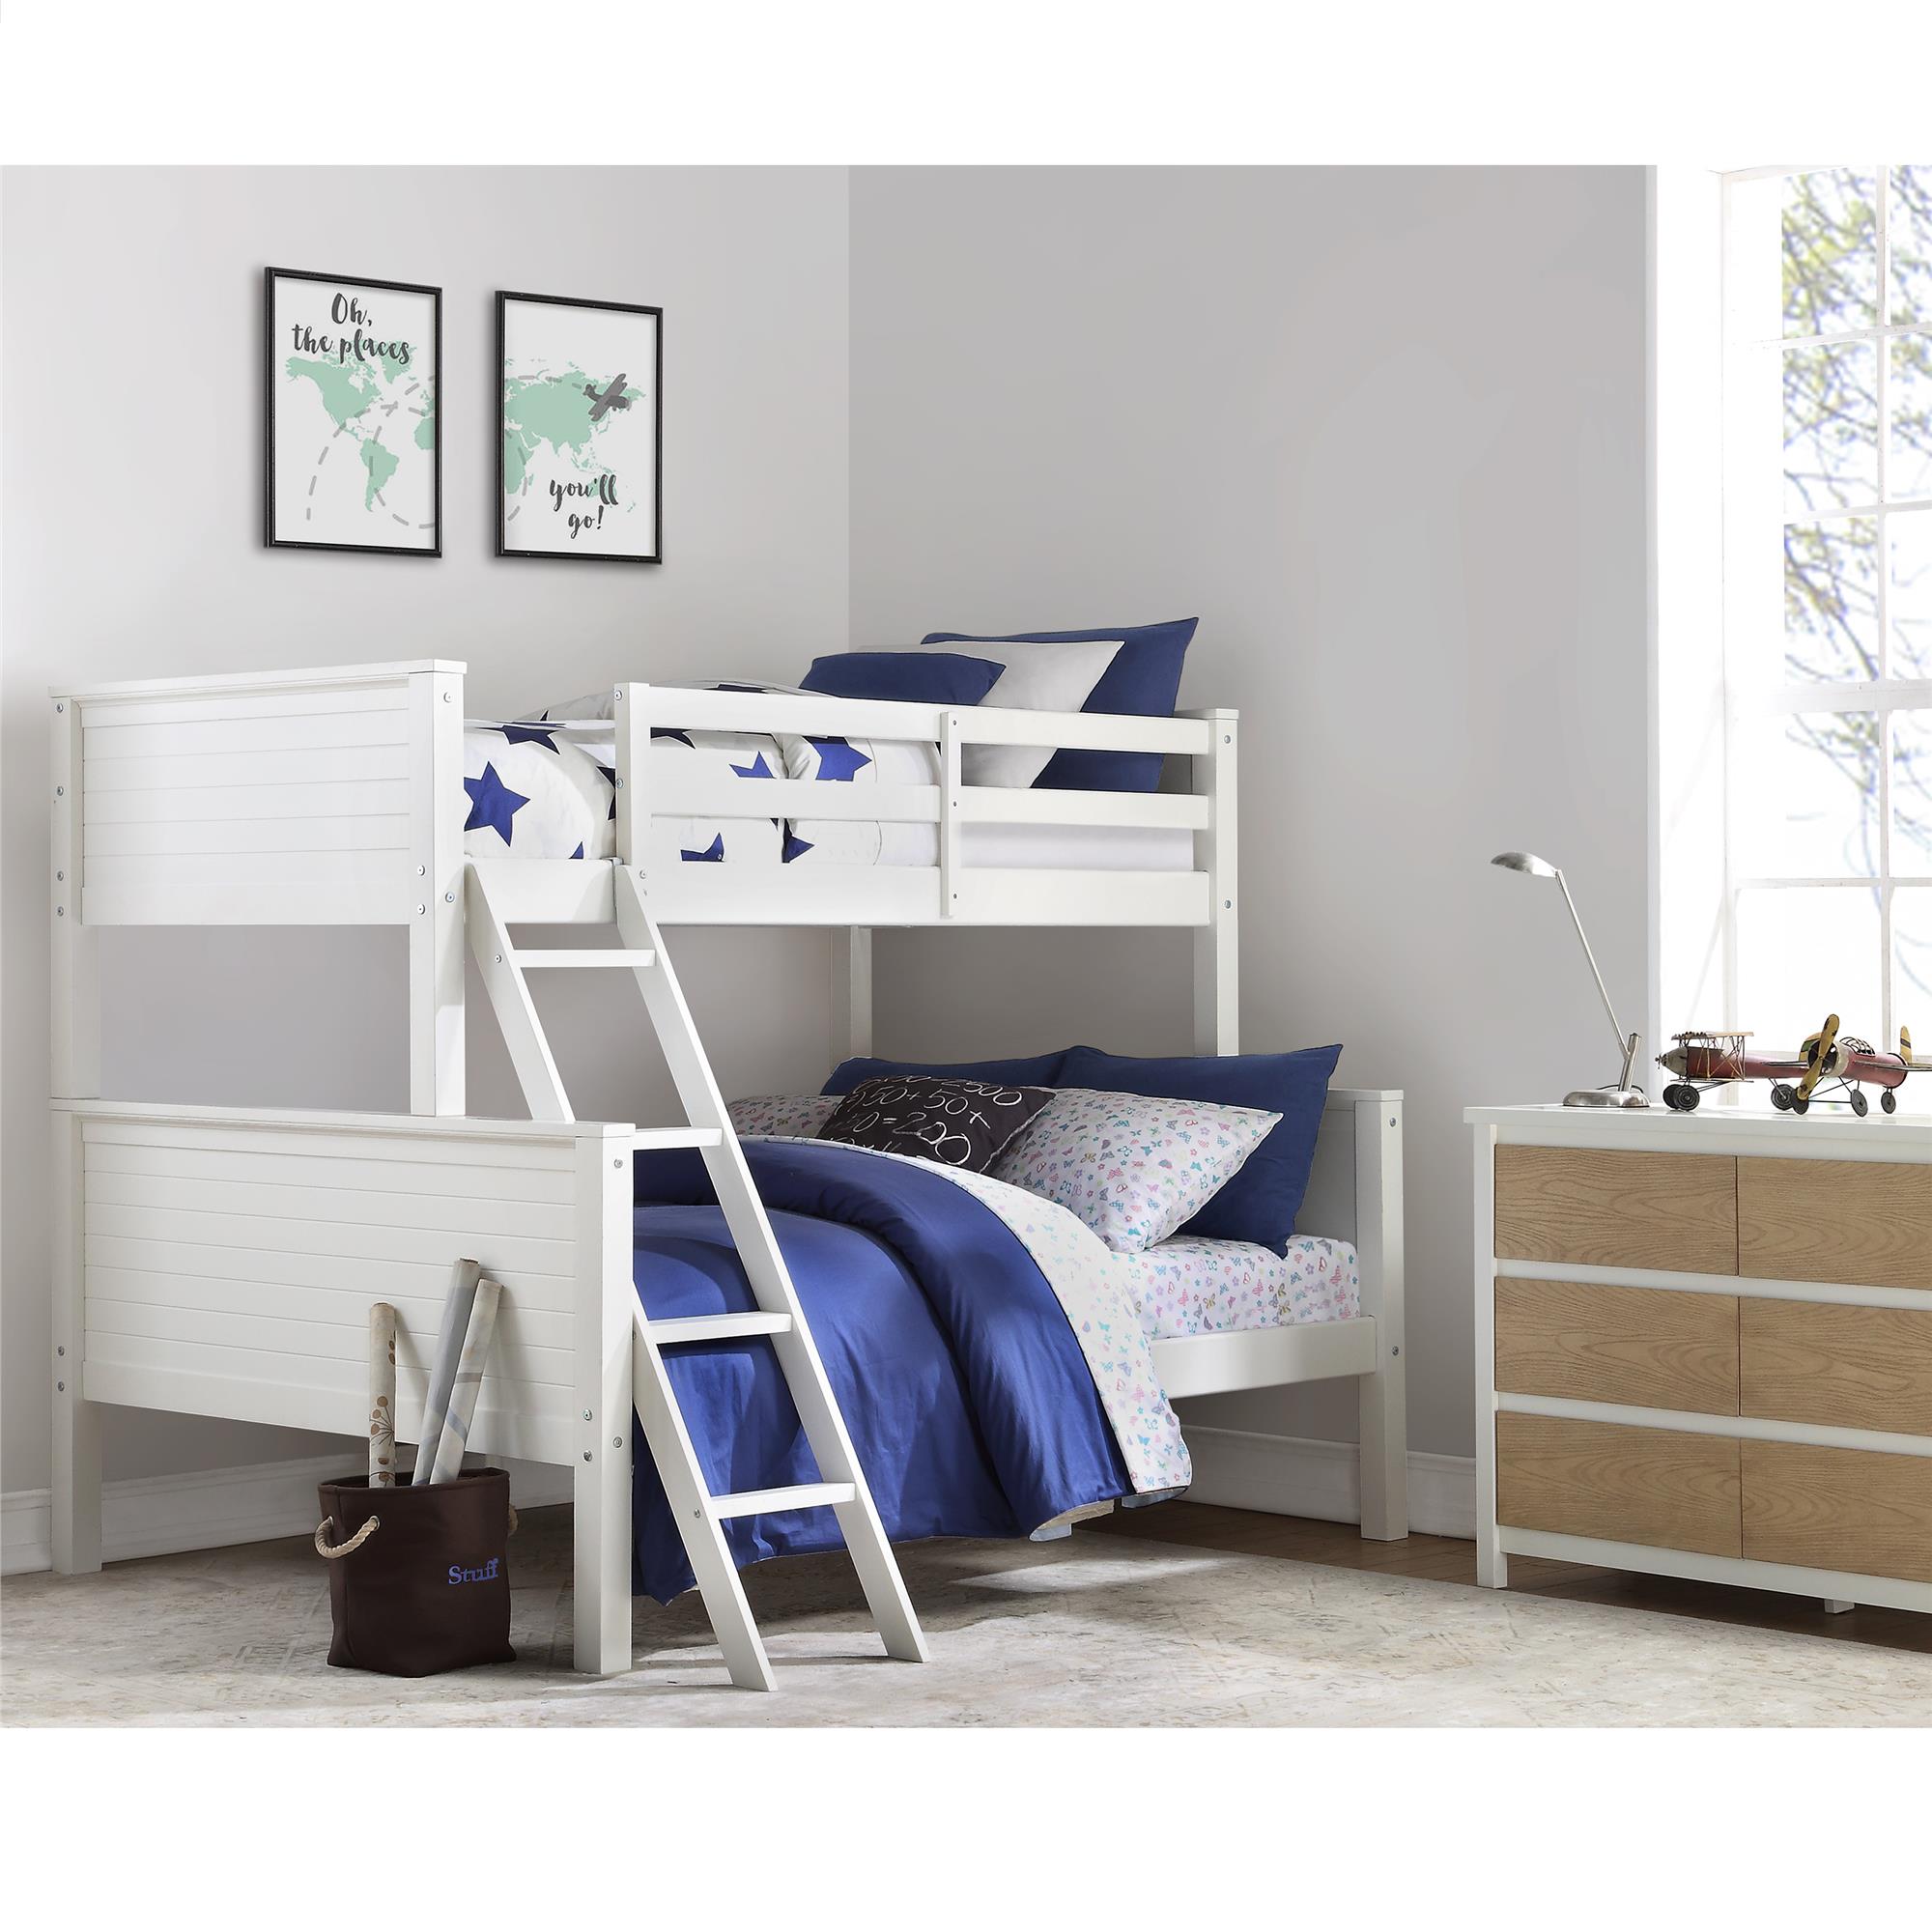 Mainstays Premium Twin Over Full Bunk Bed, Mainstays Premium Twin Over Full Bunk Bed Blueprints